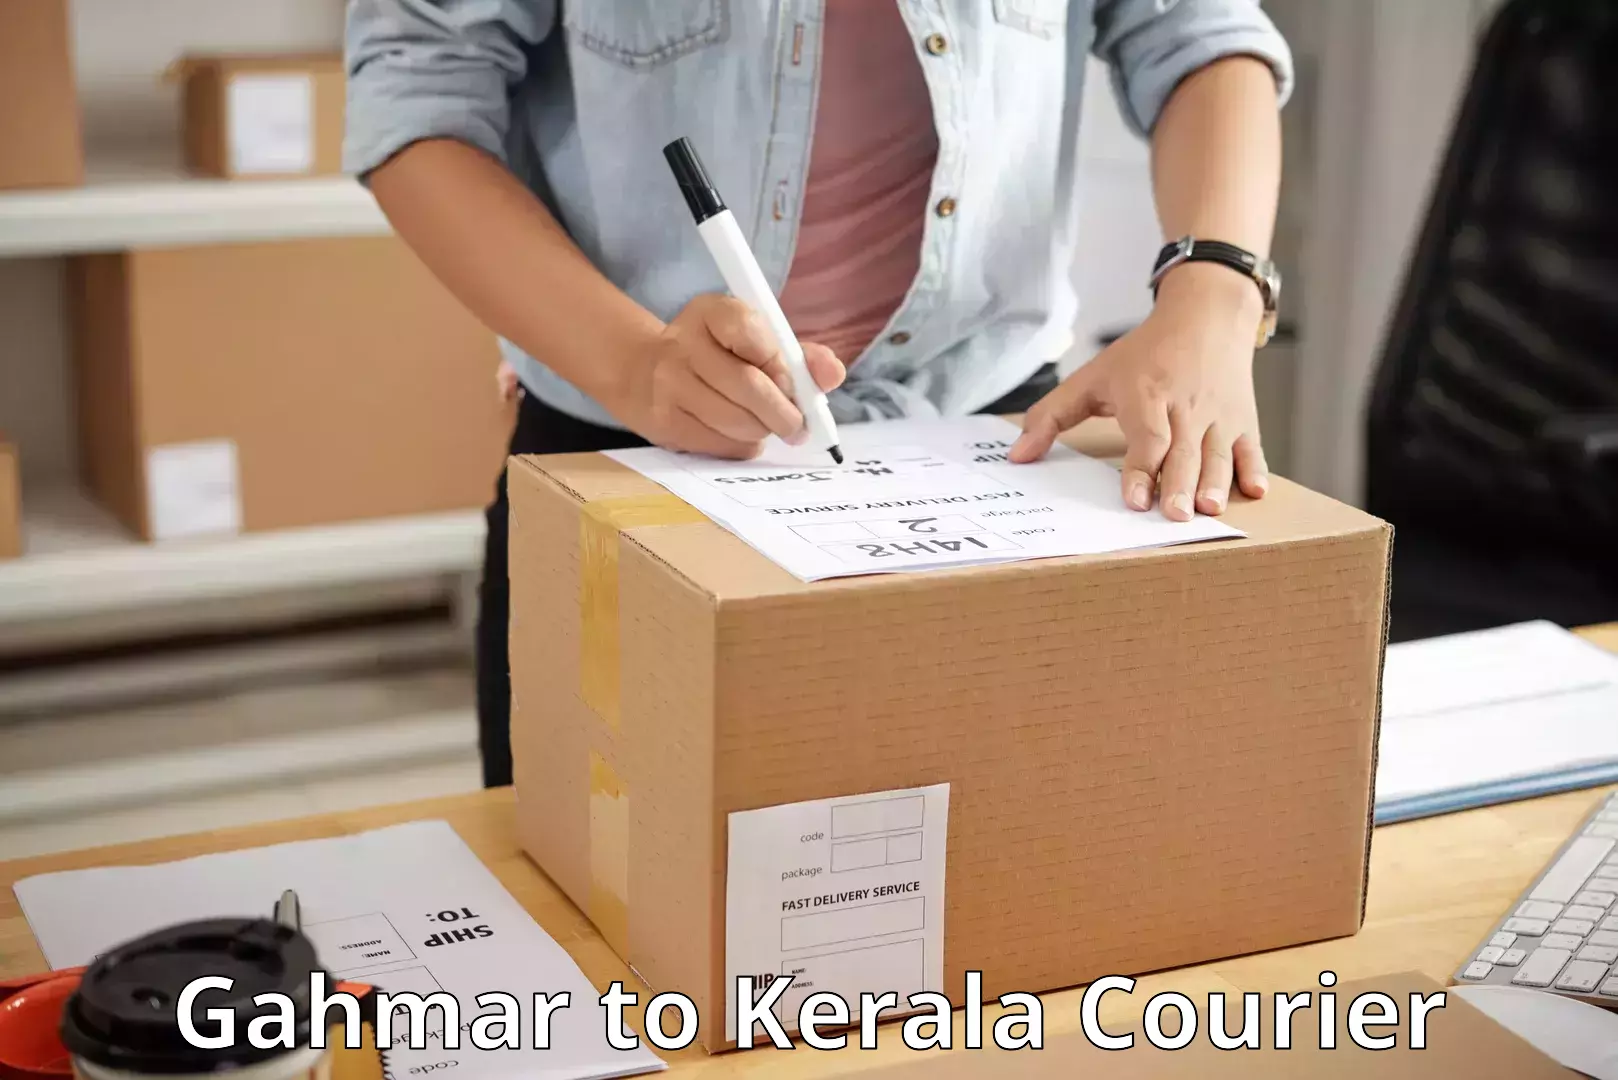 Parcel handling and care Gahmar to Kerala